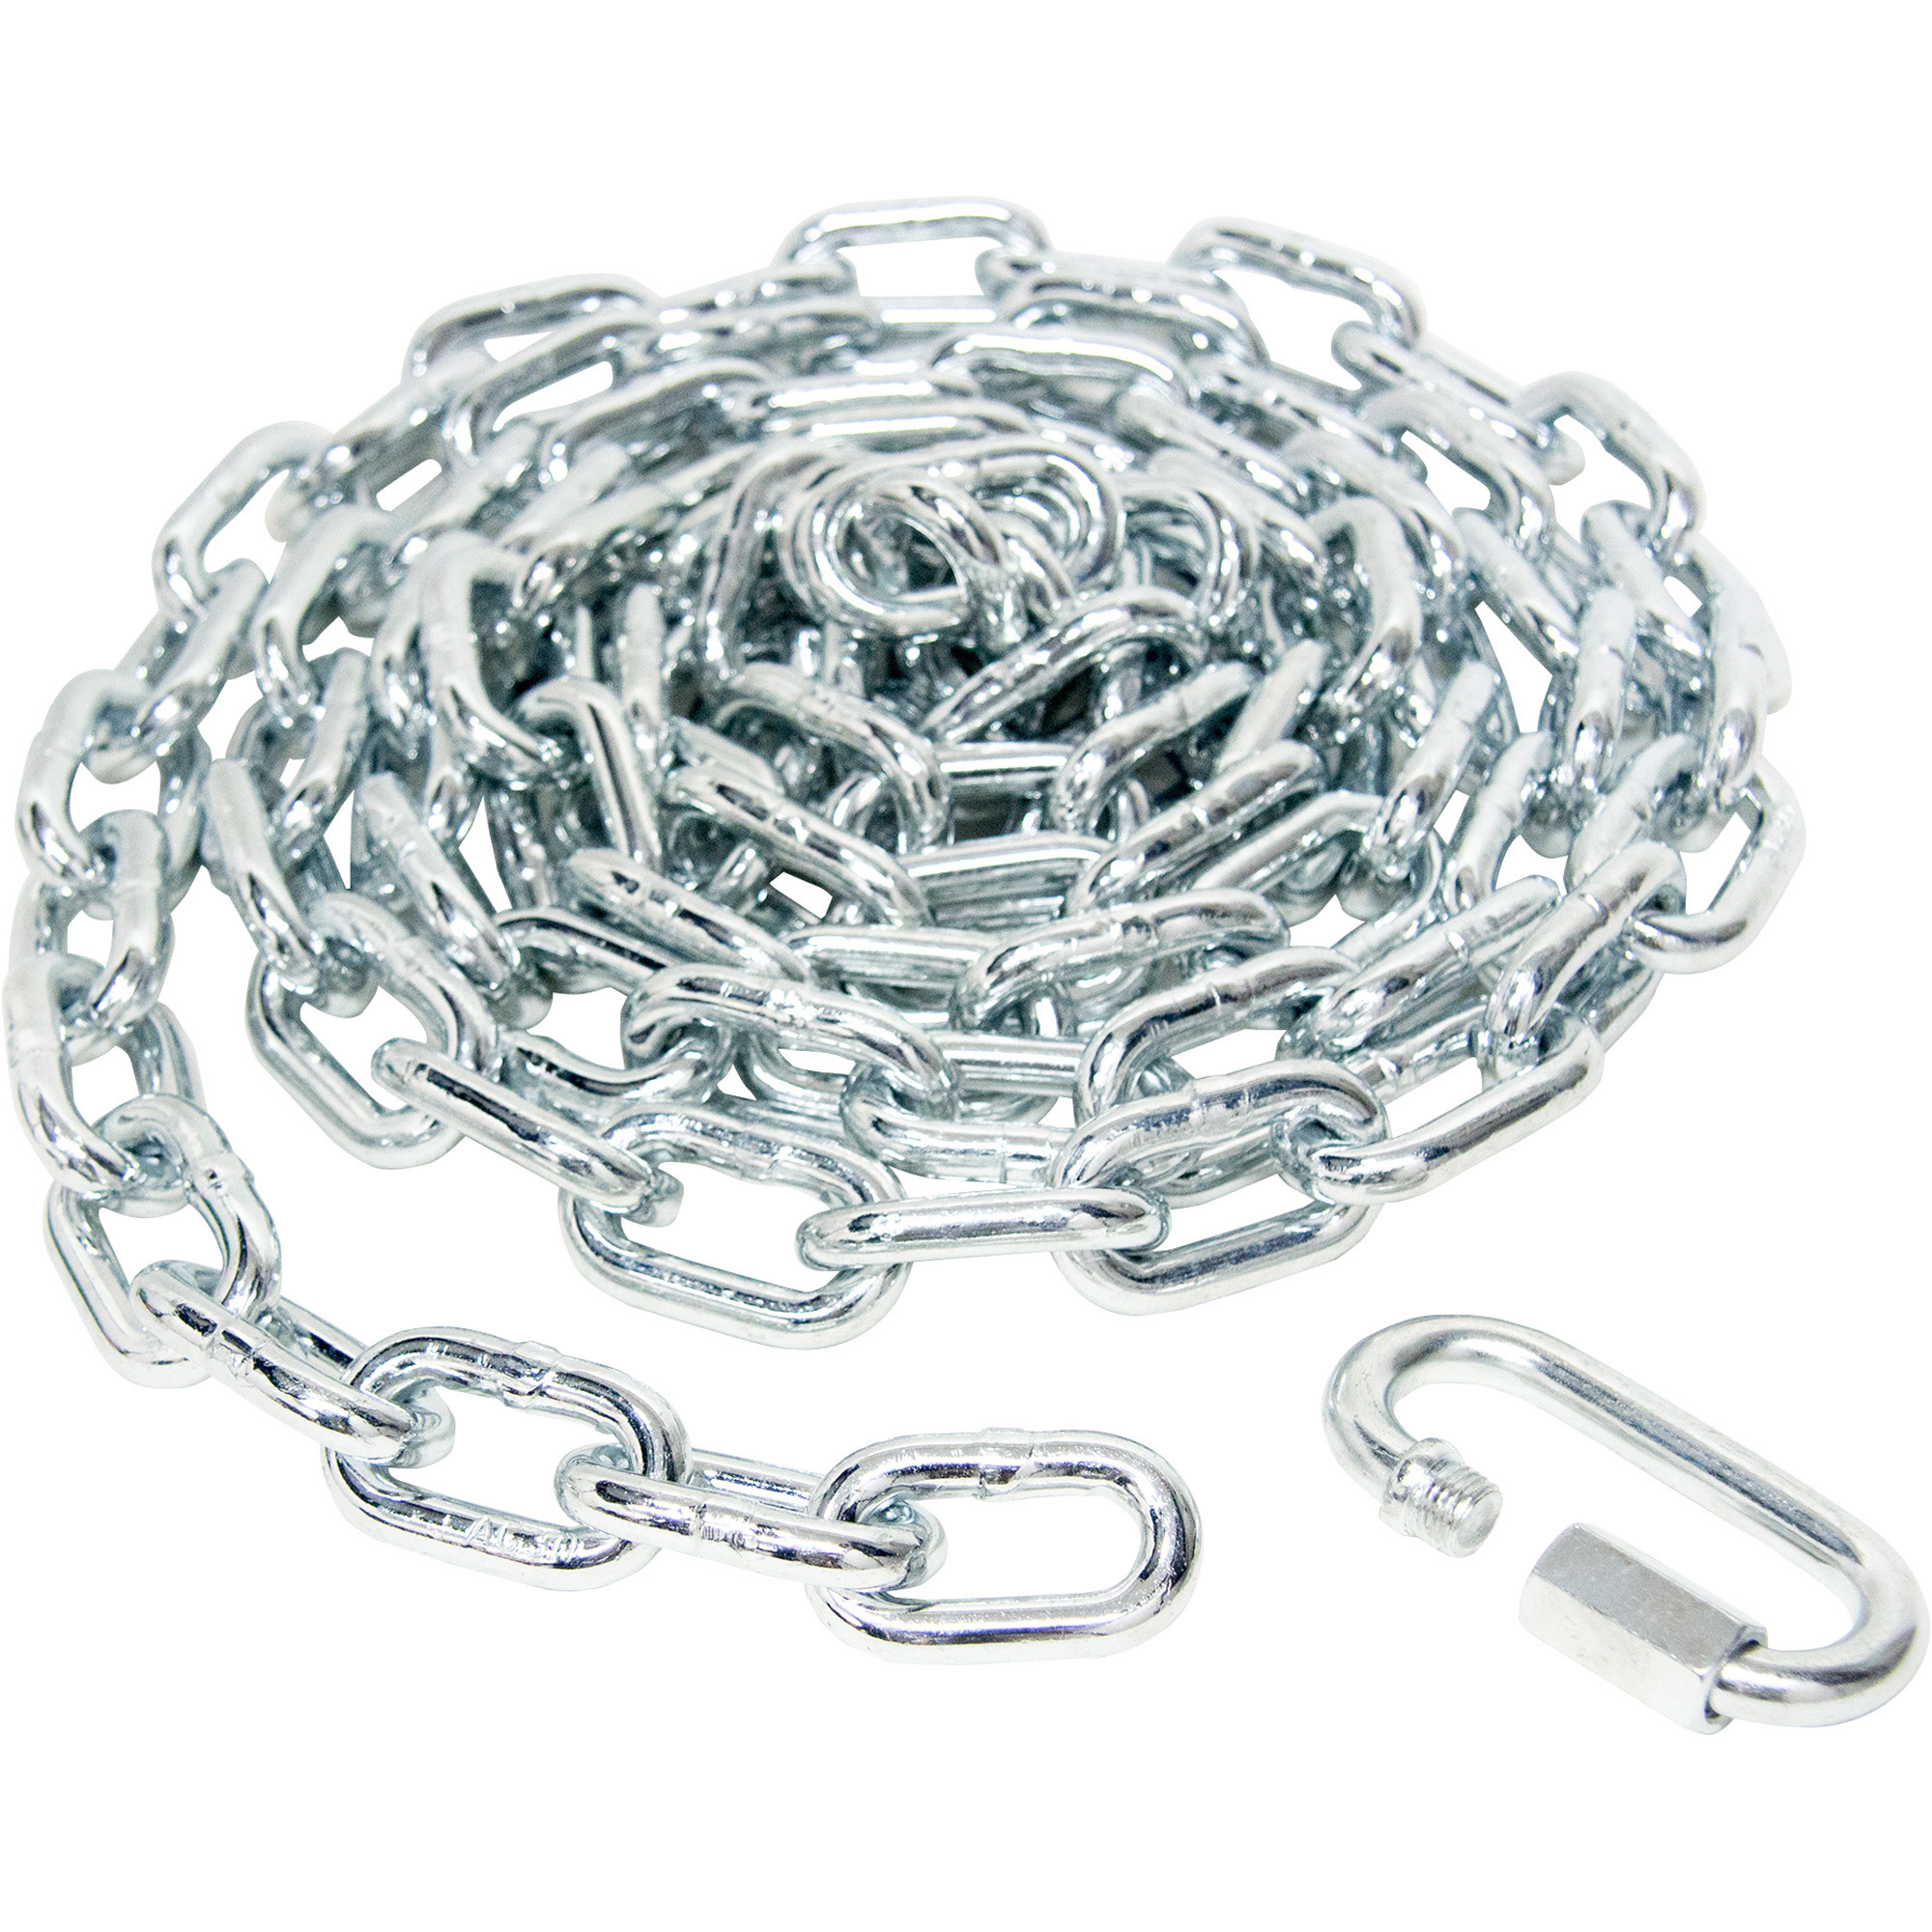 Mibro Grade 30 Proof Coil Zinc-Plated Chain, 1/4Inch x 10ft., Model 699481